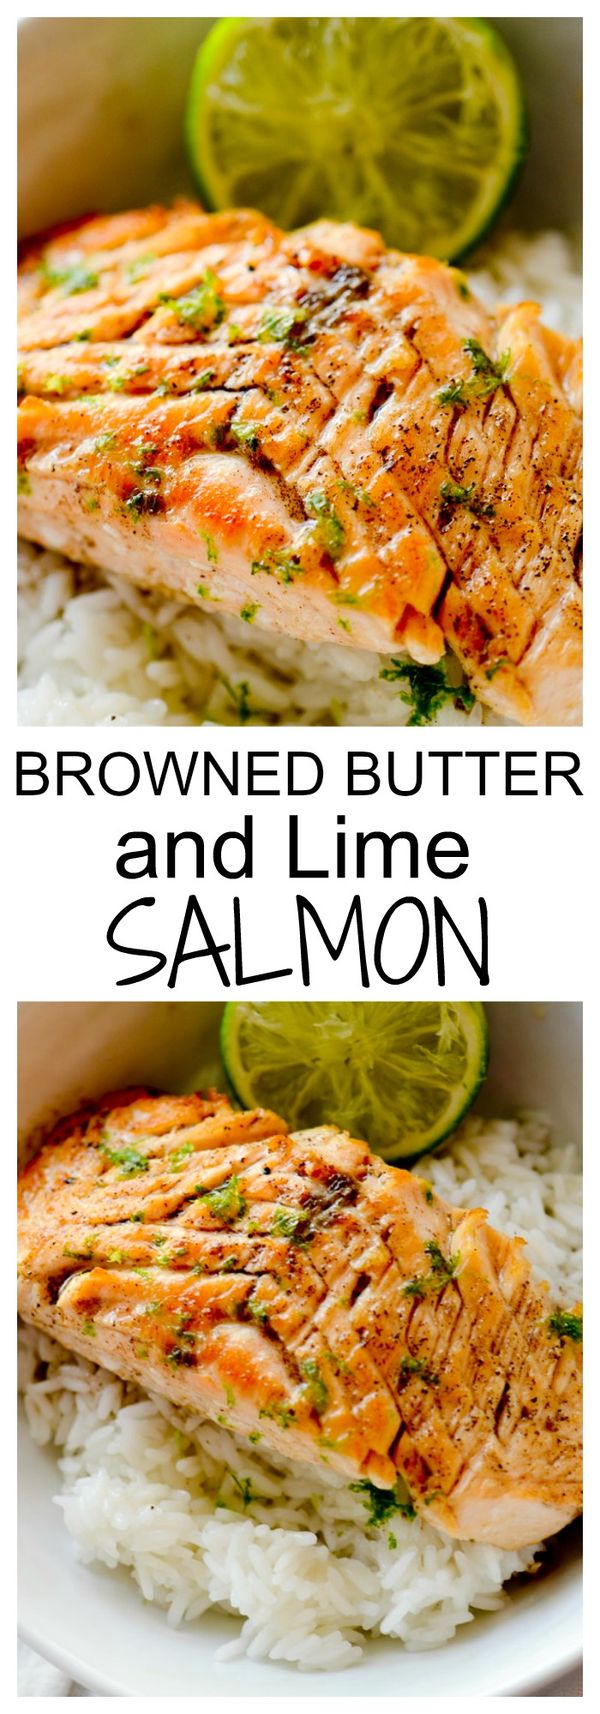 Browned Butter and Lime Salmon